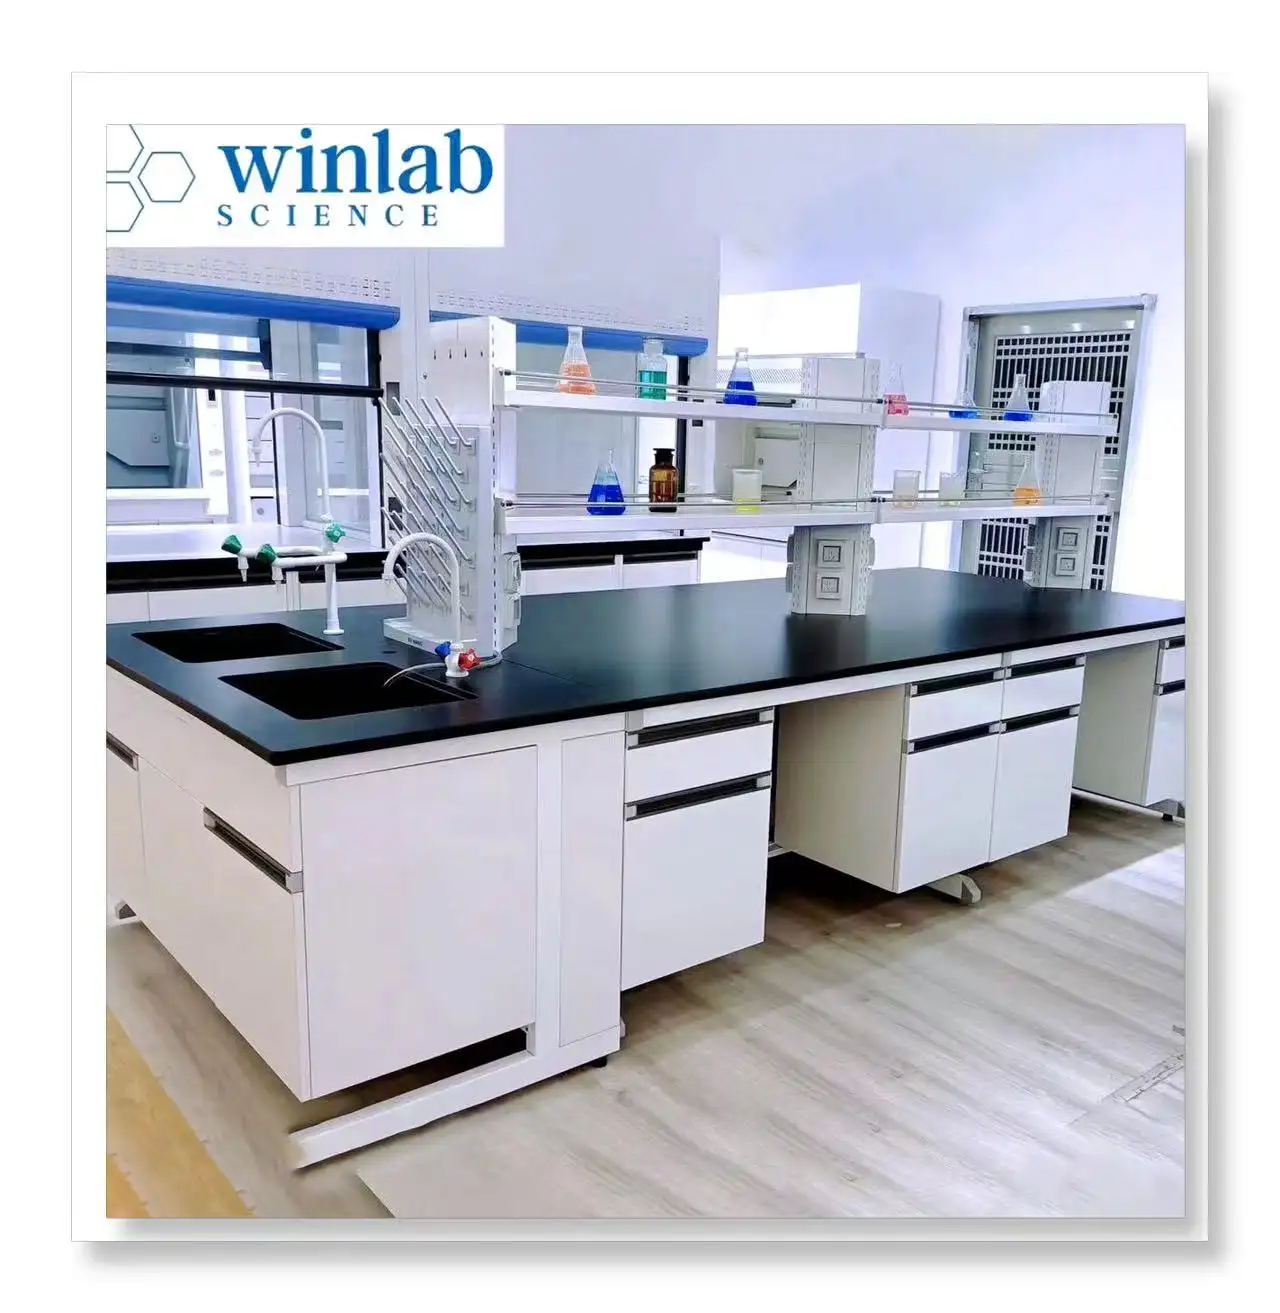 Usable Laboratory Furniture/lab Chemical/phenolic Resin Worktop Wood Work Modern School Tables and Chairs Poly Bag + Carton